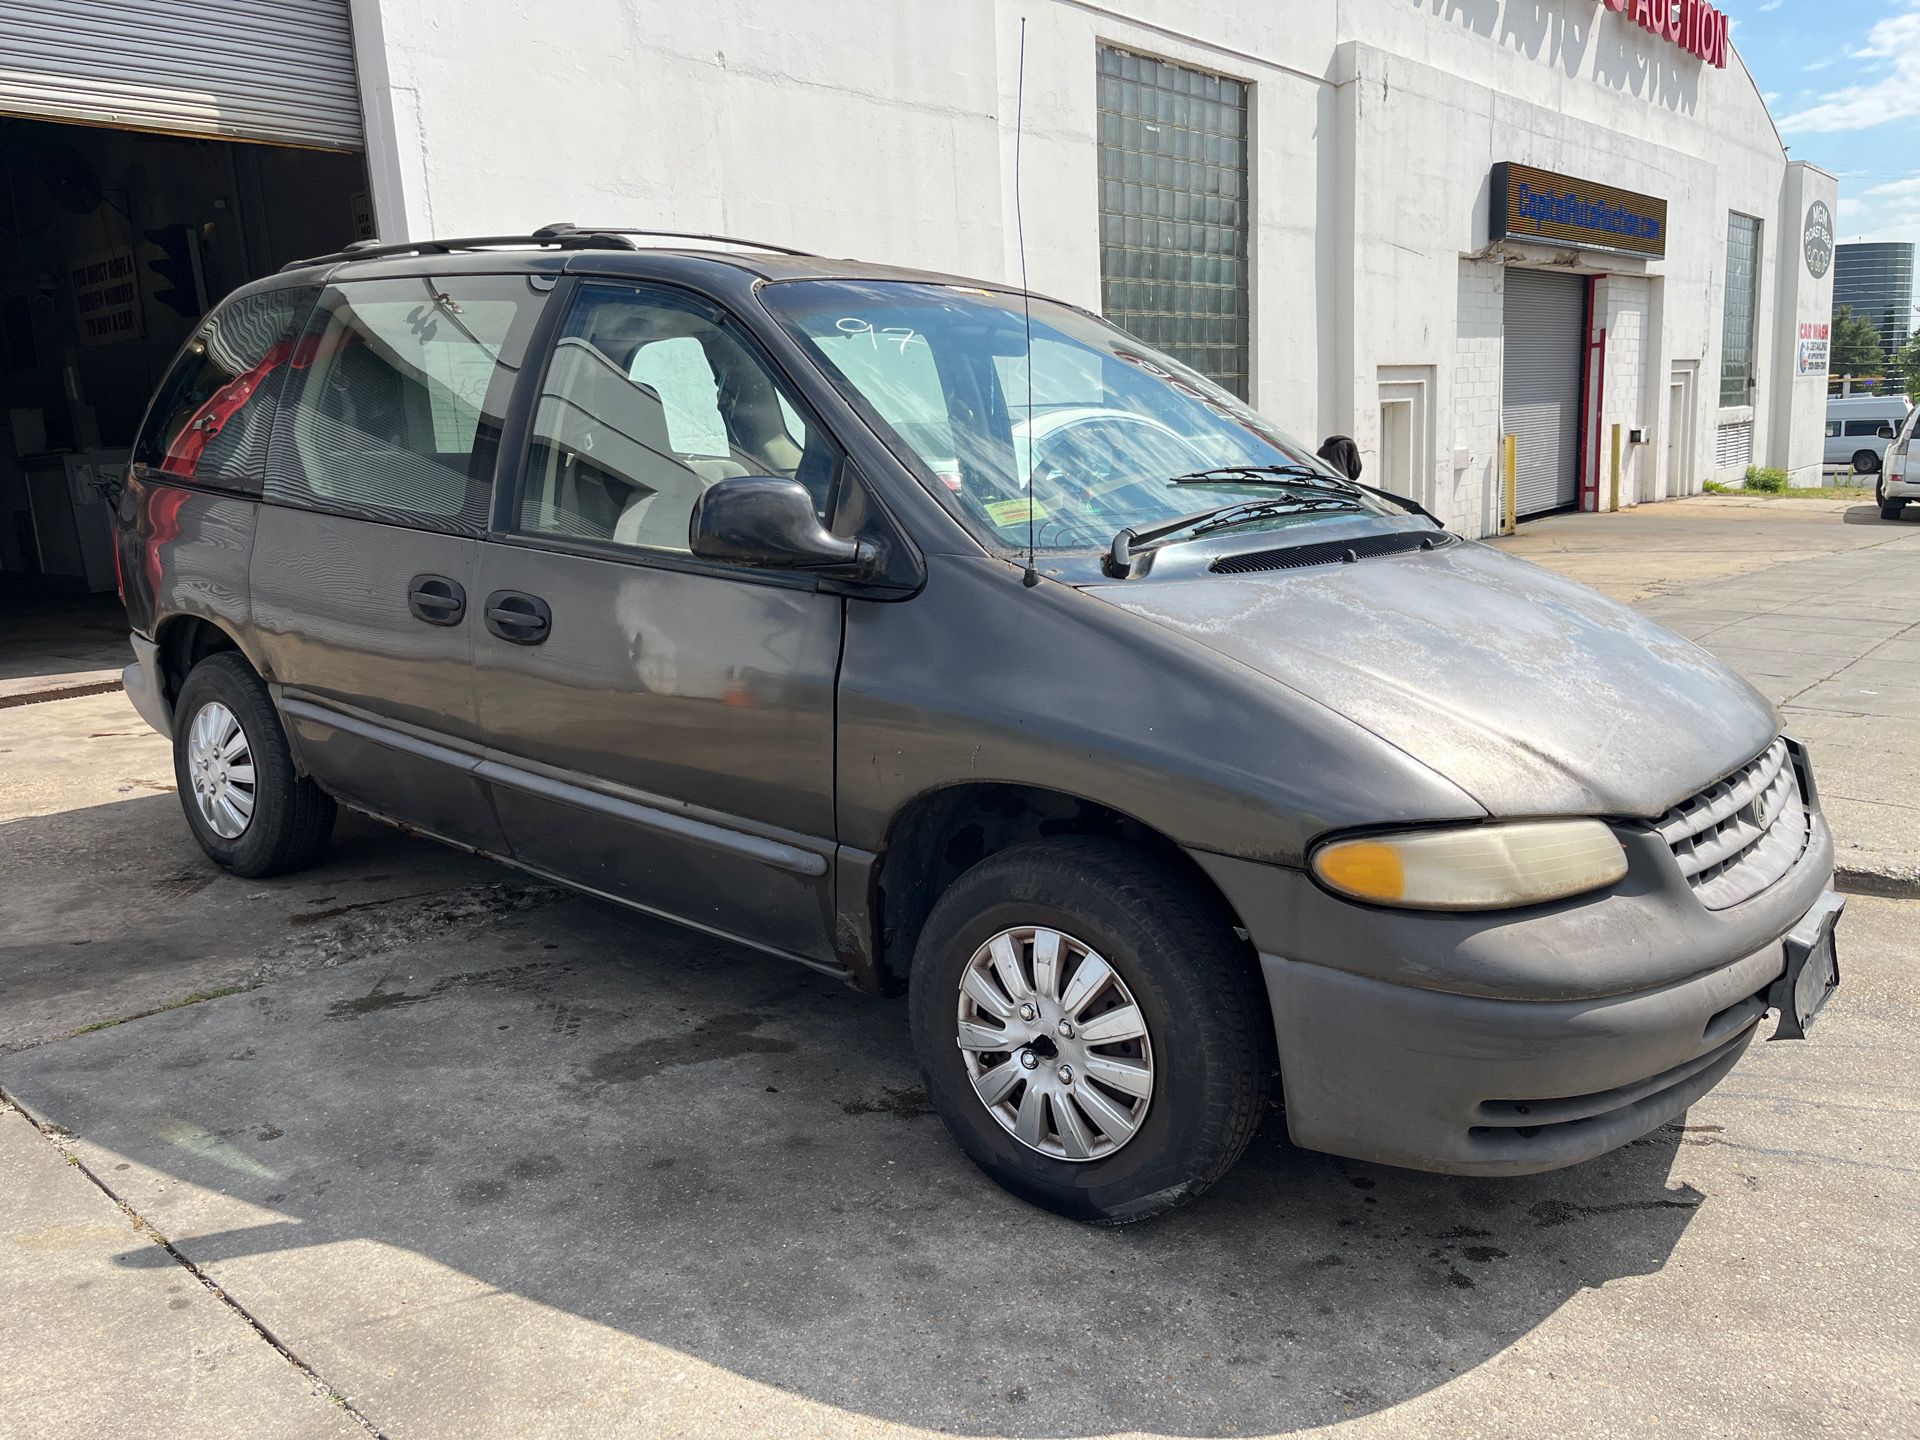 Internet Auction | DDB64821 1997 Plymouth Voyager